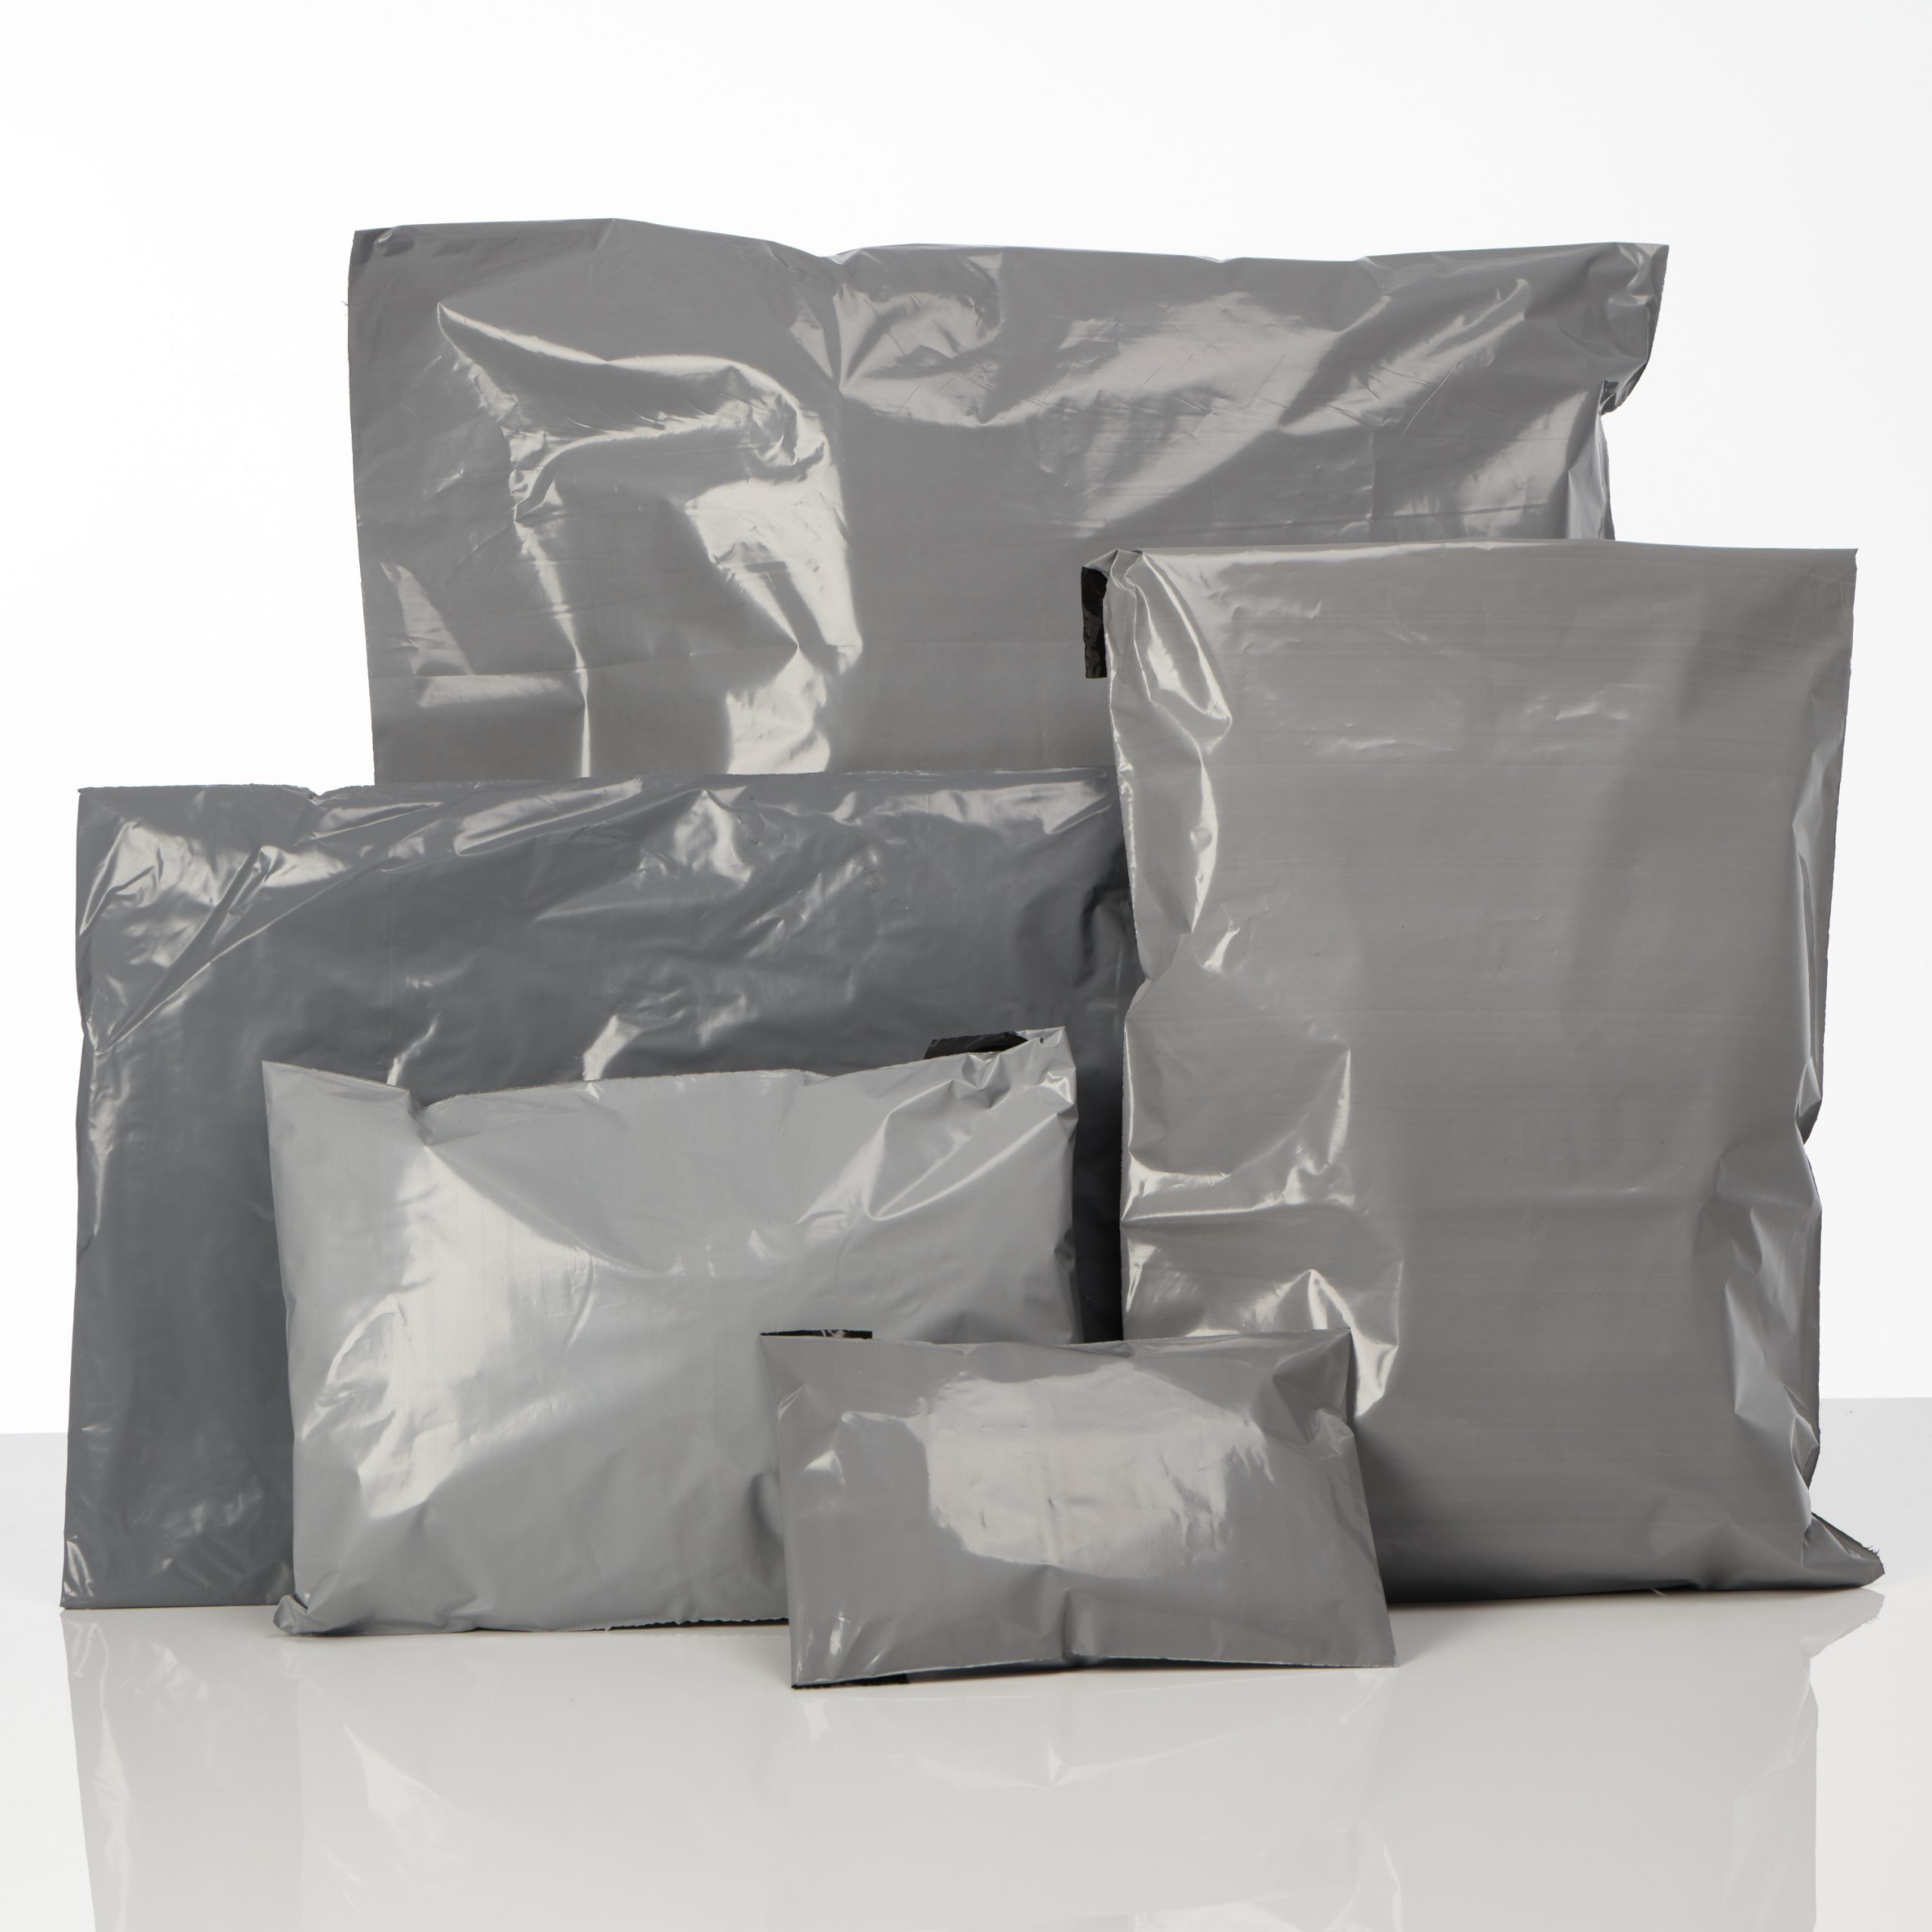 Coloured Mailing Plastic Postage Mail Polythene Mail Poly Bags Strong Self Seal 